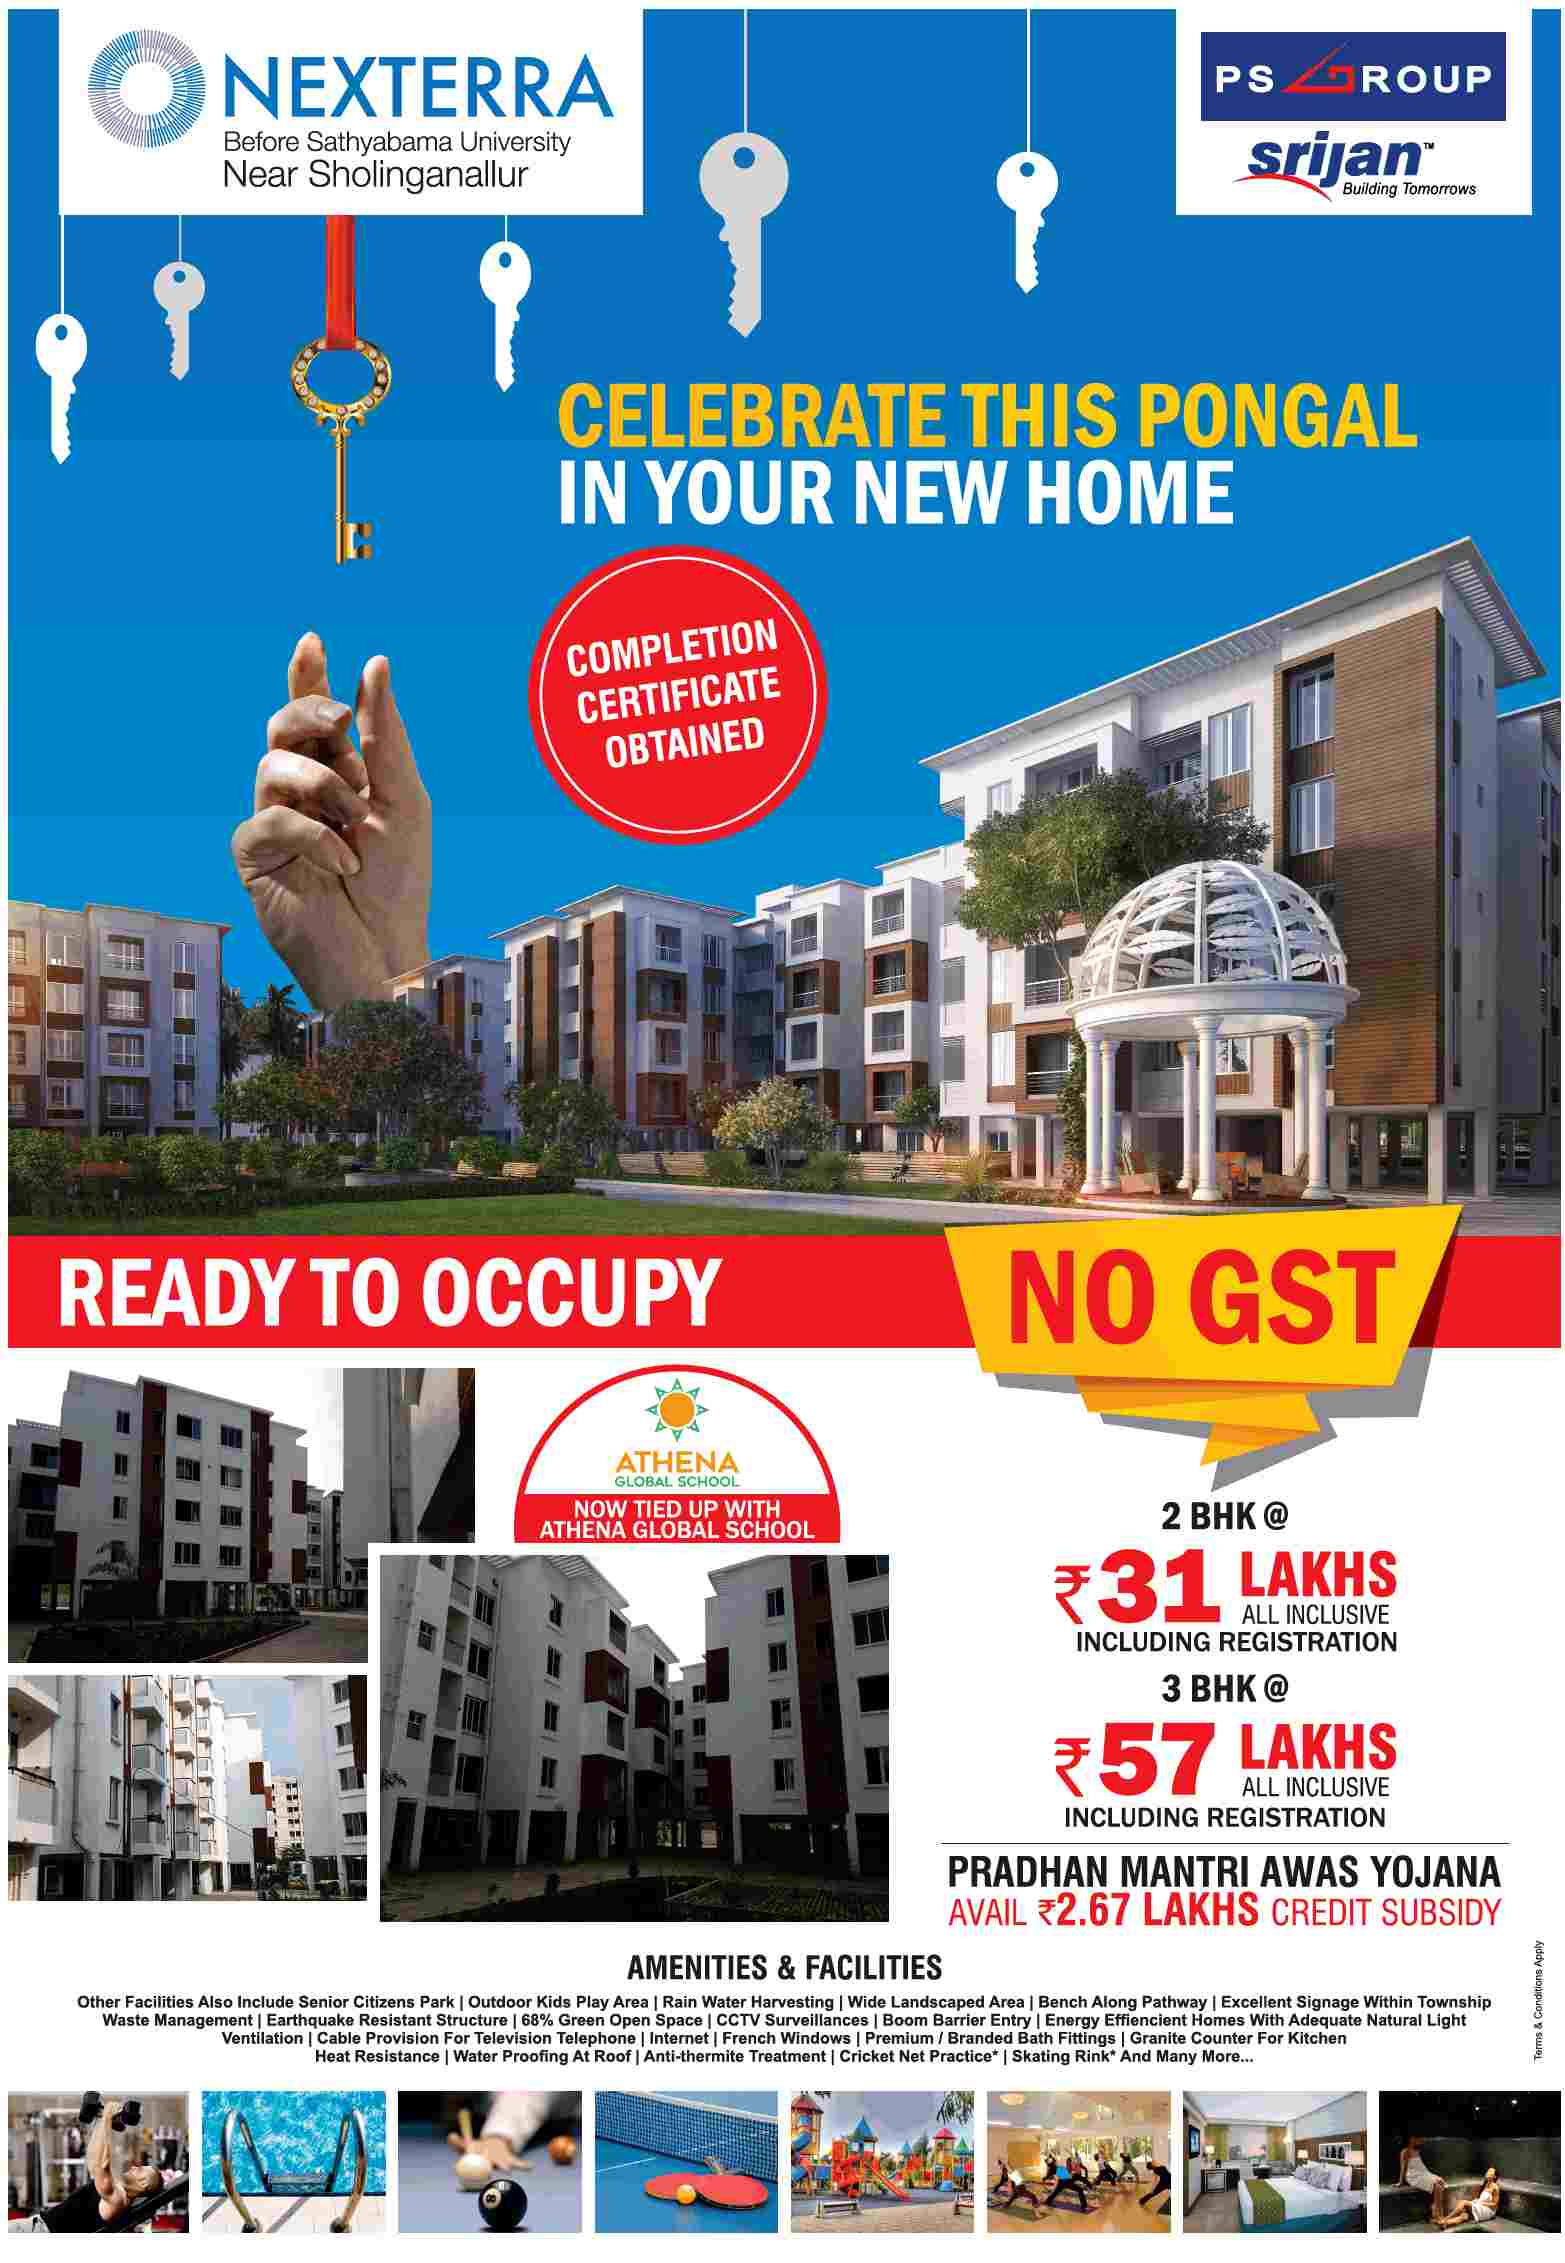 Celebrate this Pongal in your new home at PS Srijan Nexterra in Chennai Update